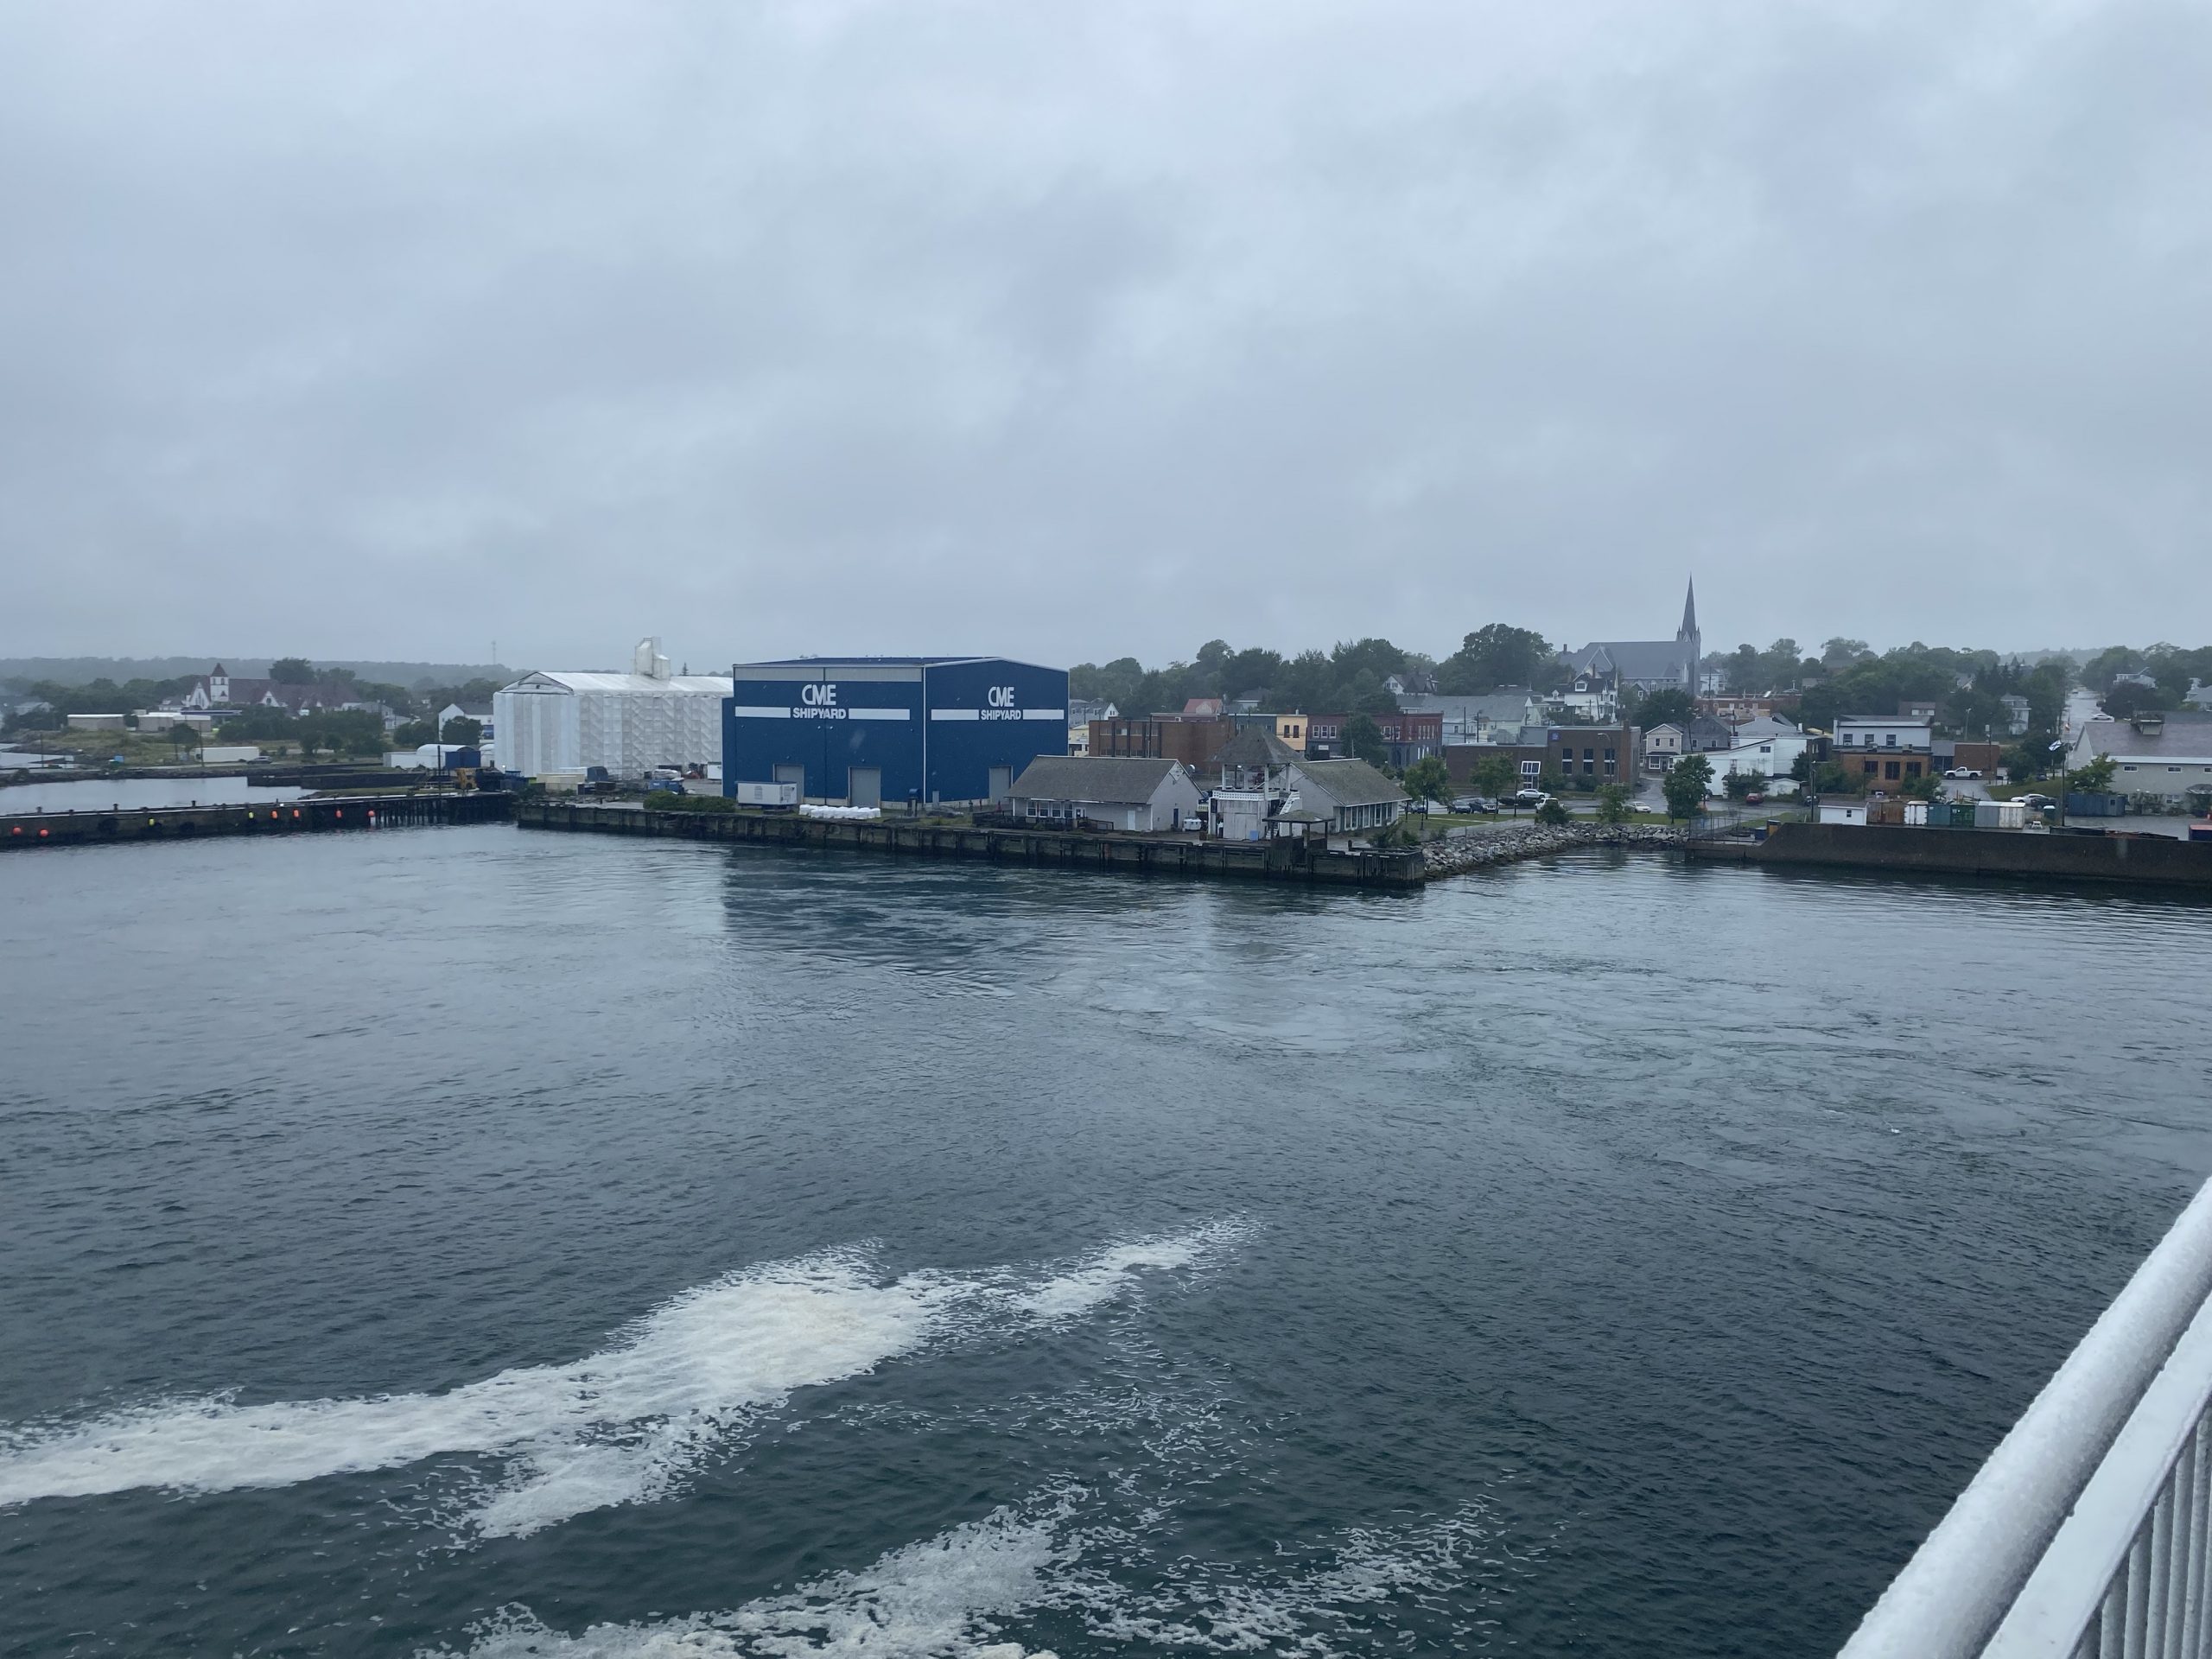 The town of North Sydney, Nova Scotia, from the deck of our docked ferry.